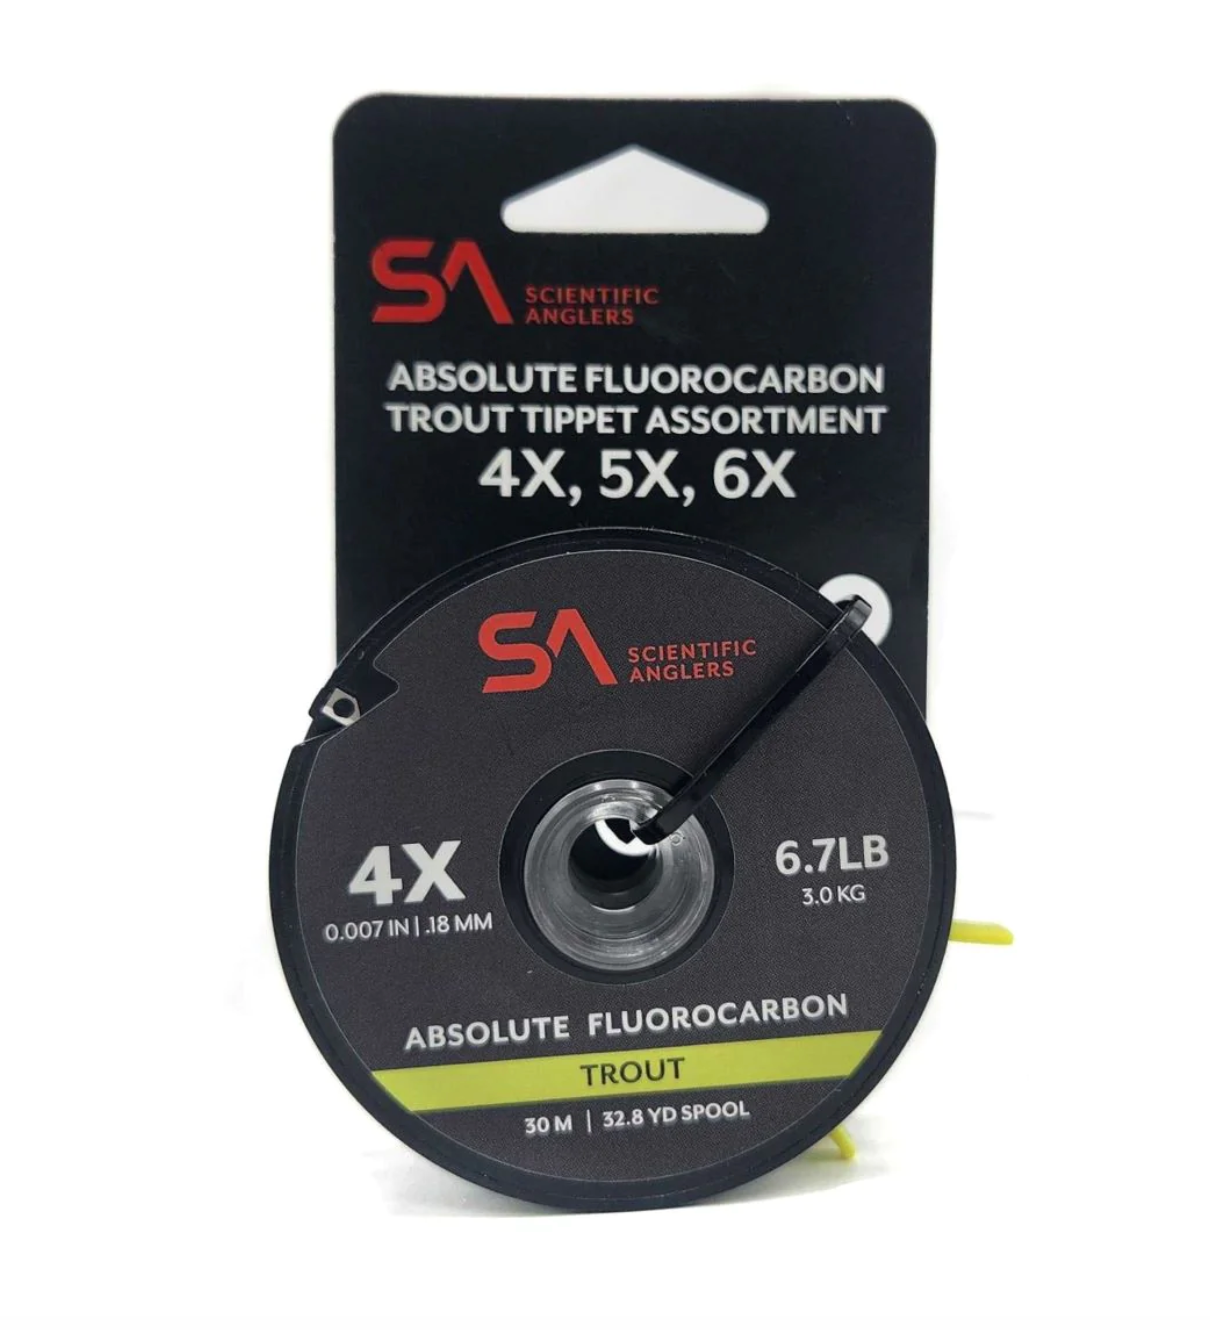 Scientific Anglers Absolute Fluorocarbon Trout Tippet Assortment